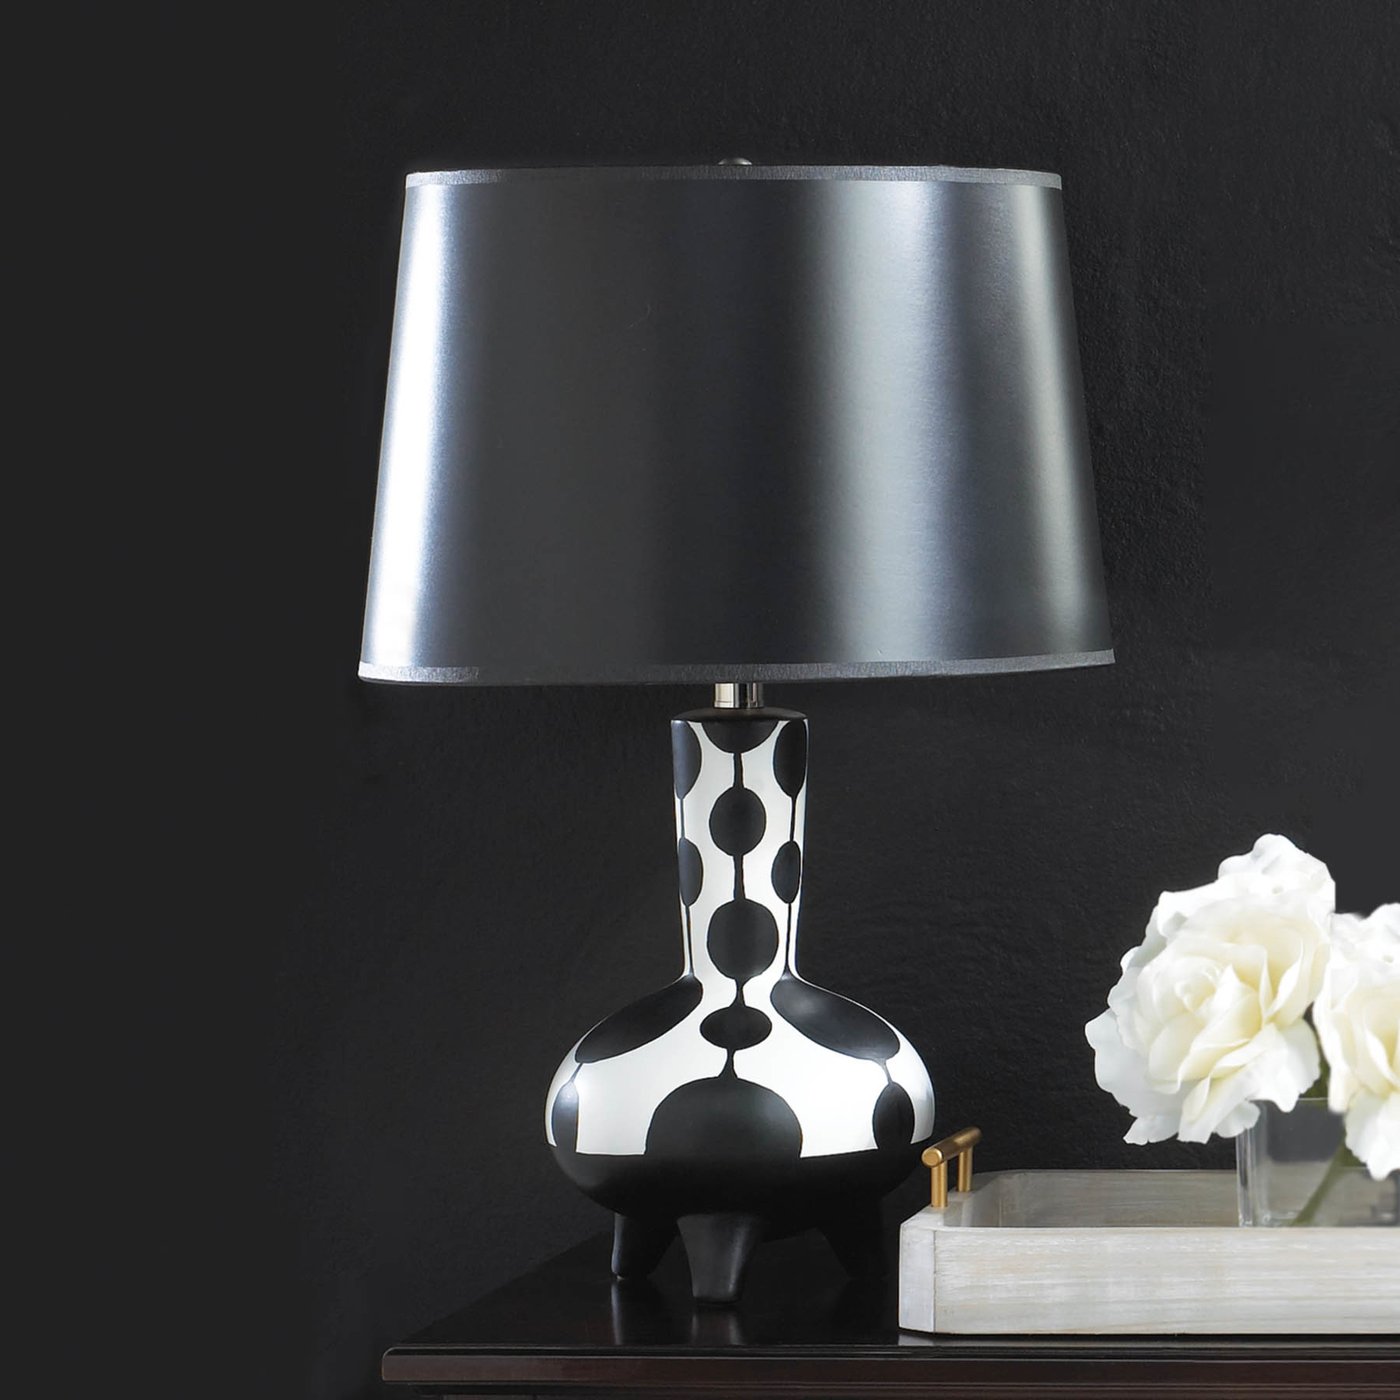 Dollop Black and White Table Lamp